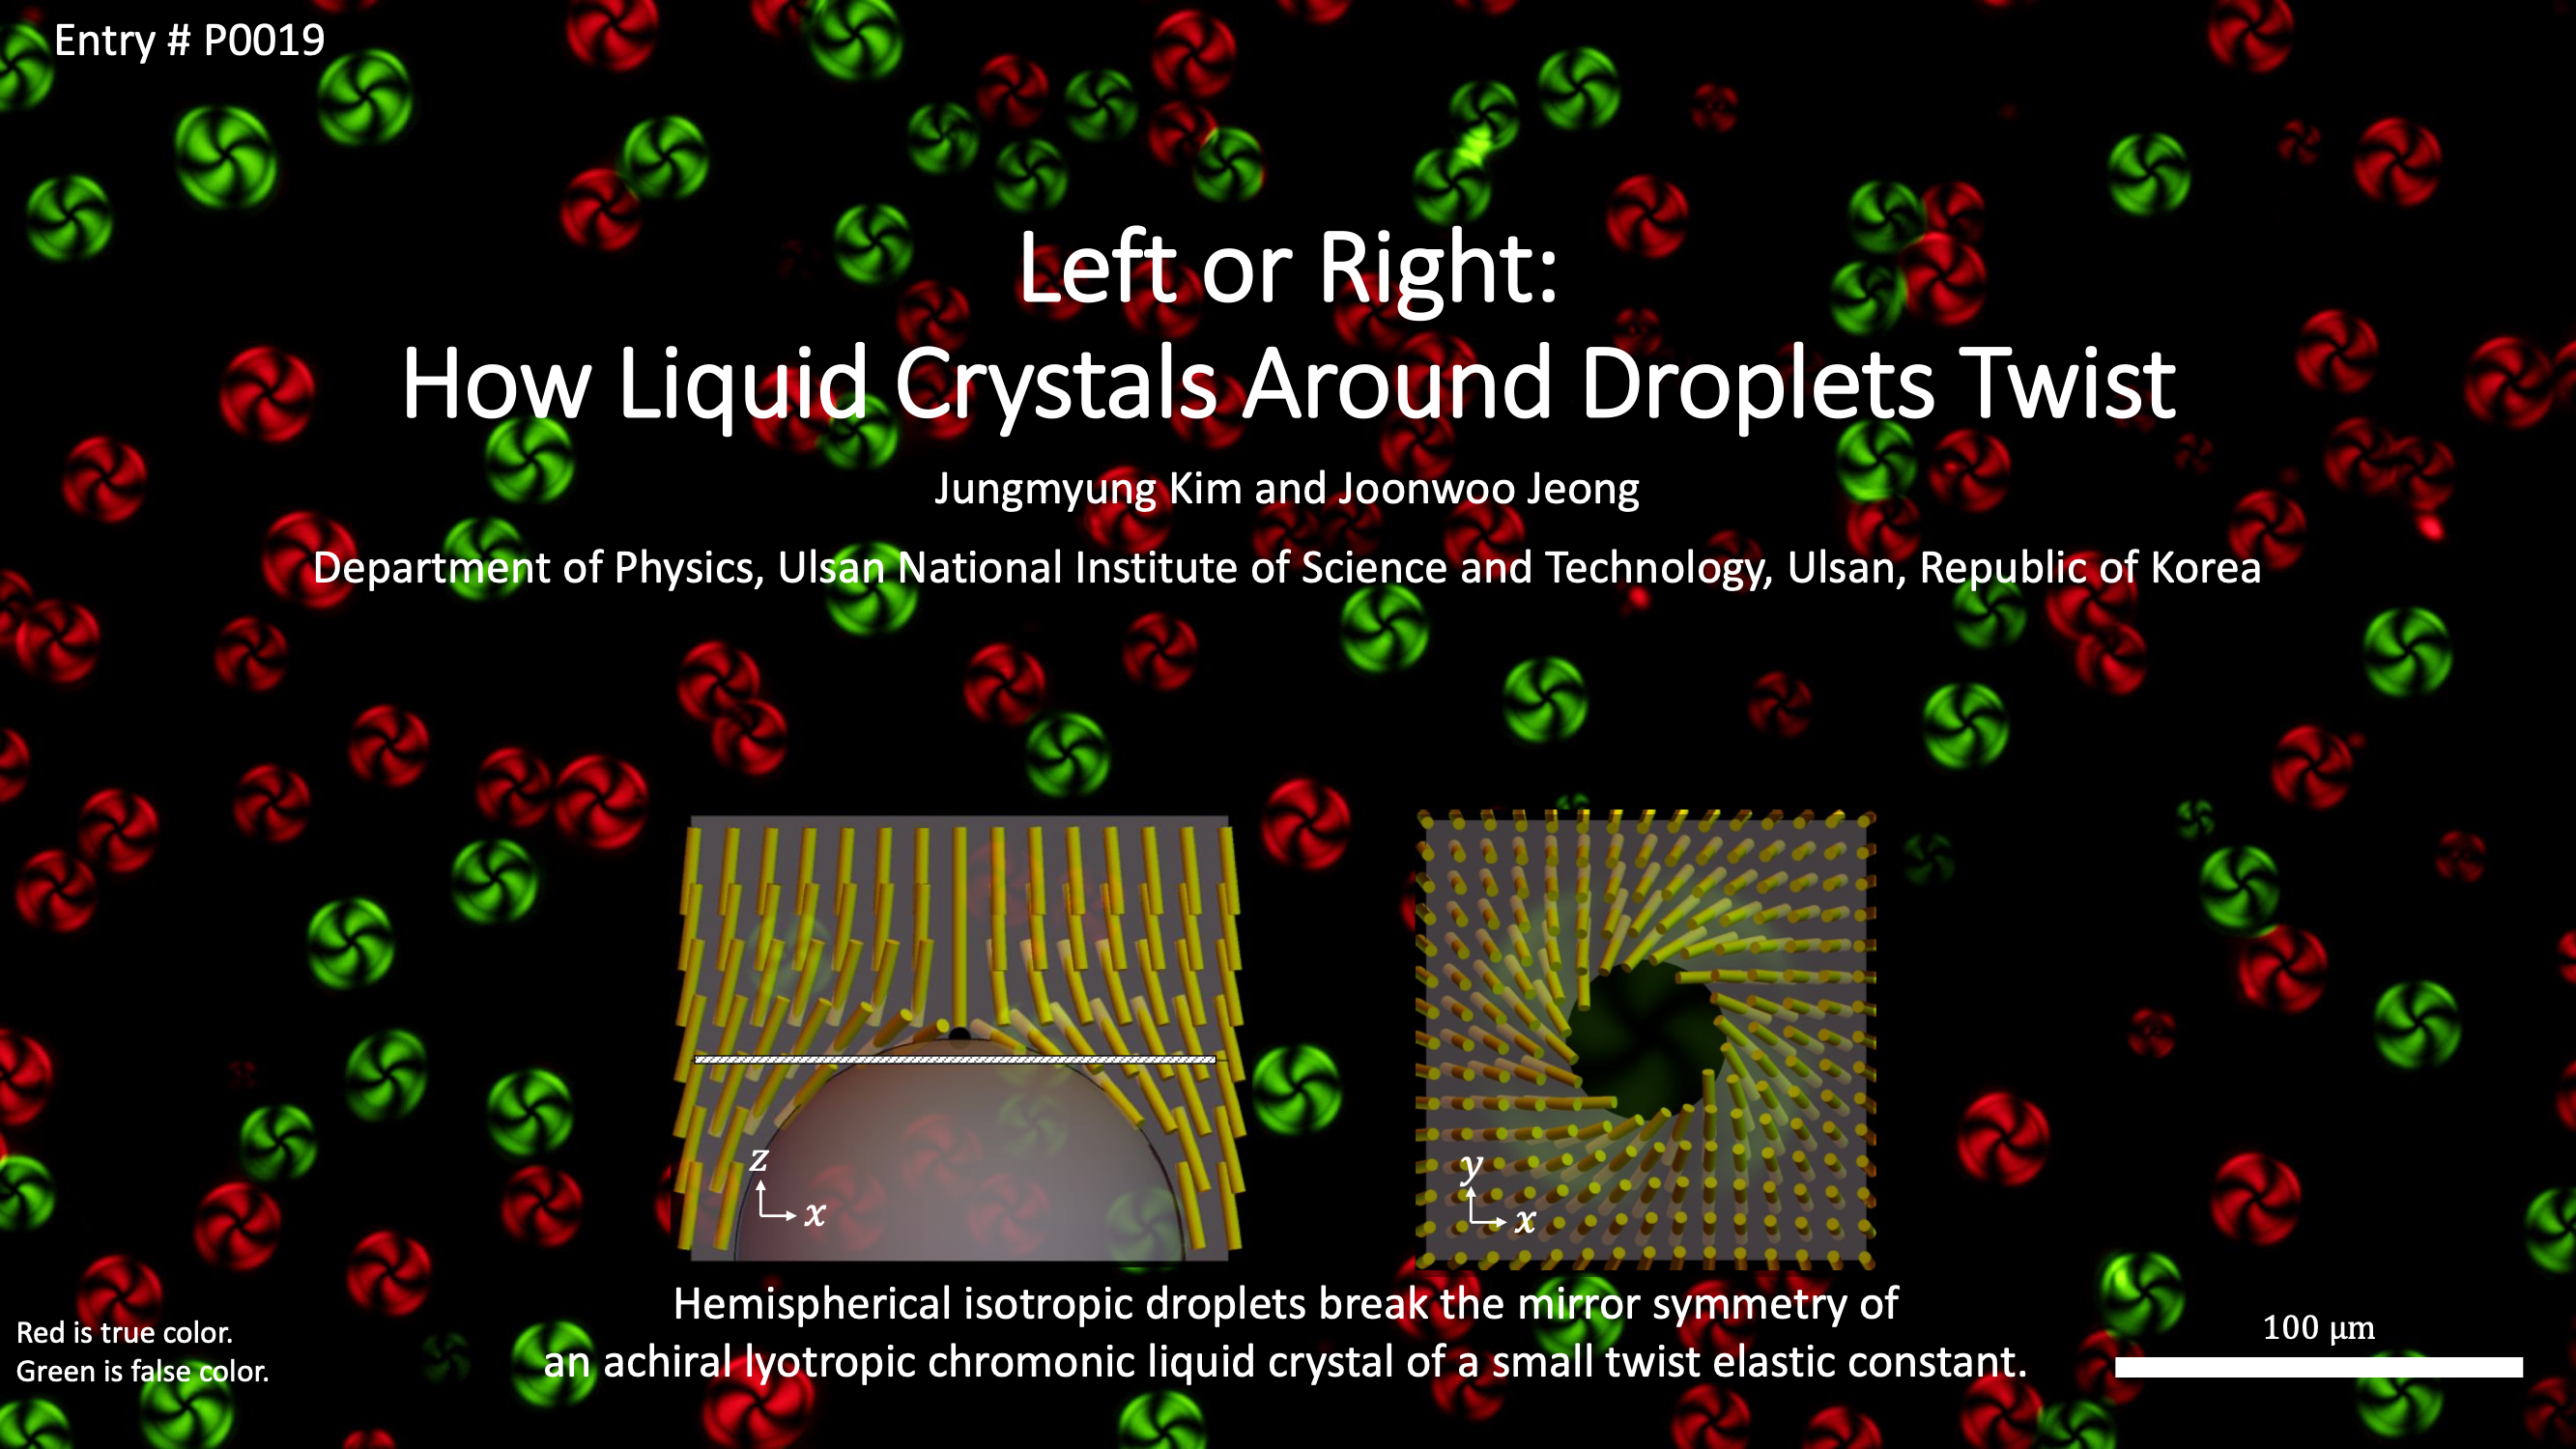 Left or Right: How Liquid Crystals Around Droplets Twist